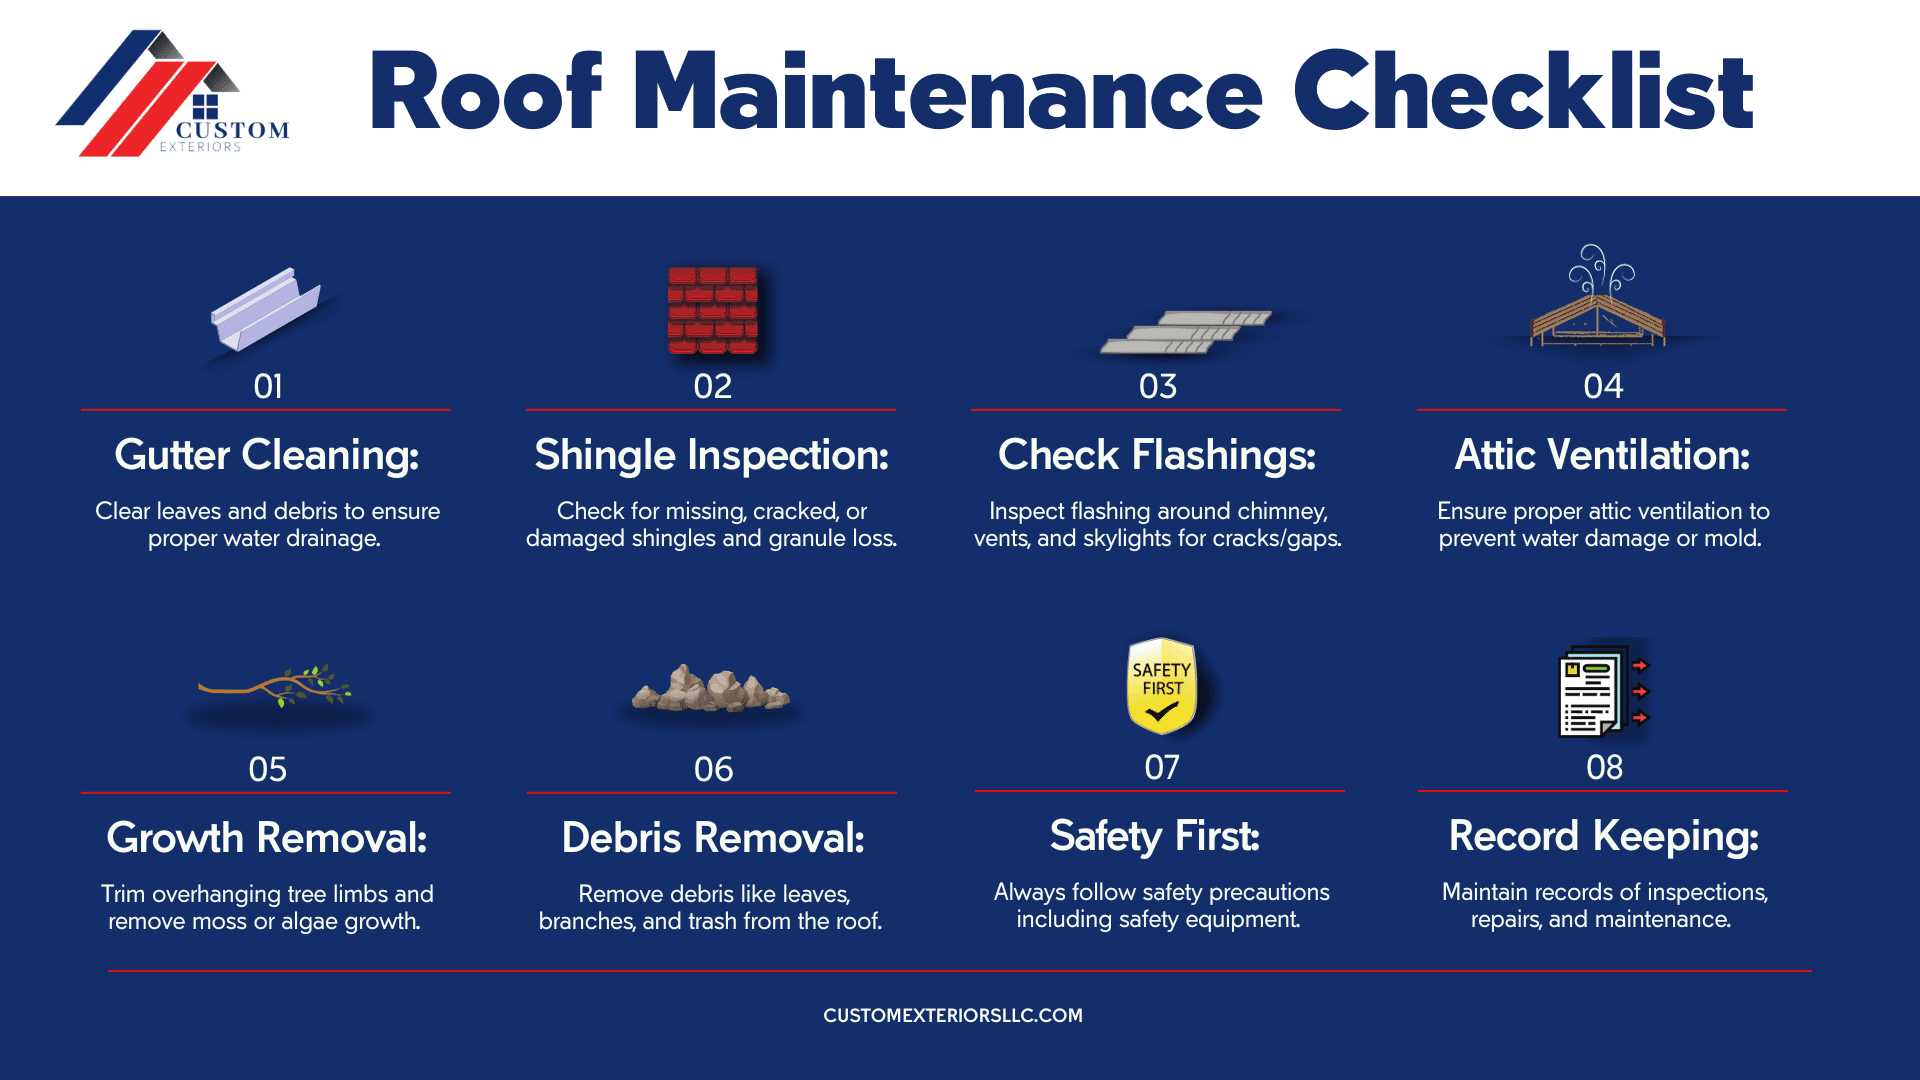 Infographic created by Custom Exteriors to provide a list of things that need to be checked regularly when inspecting your roof